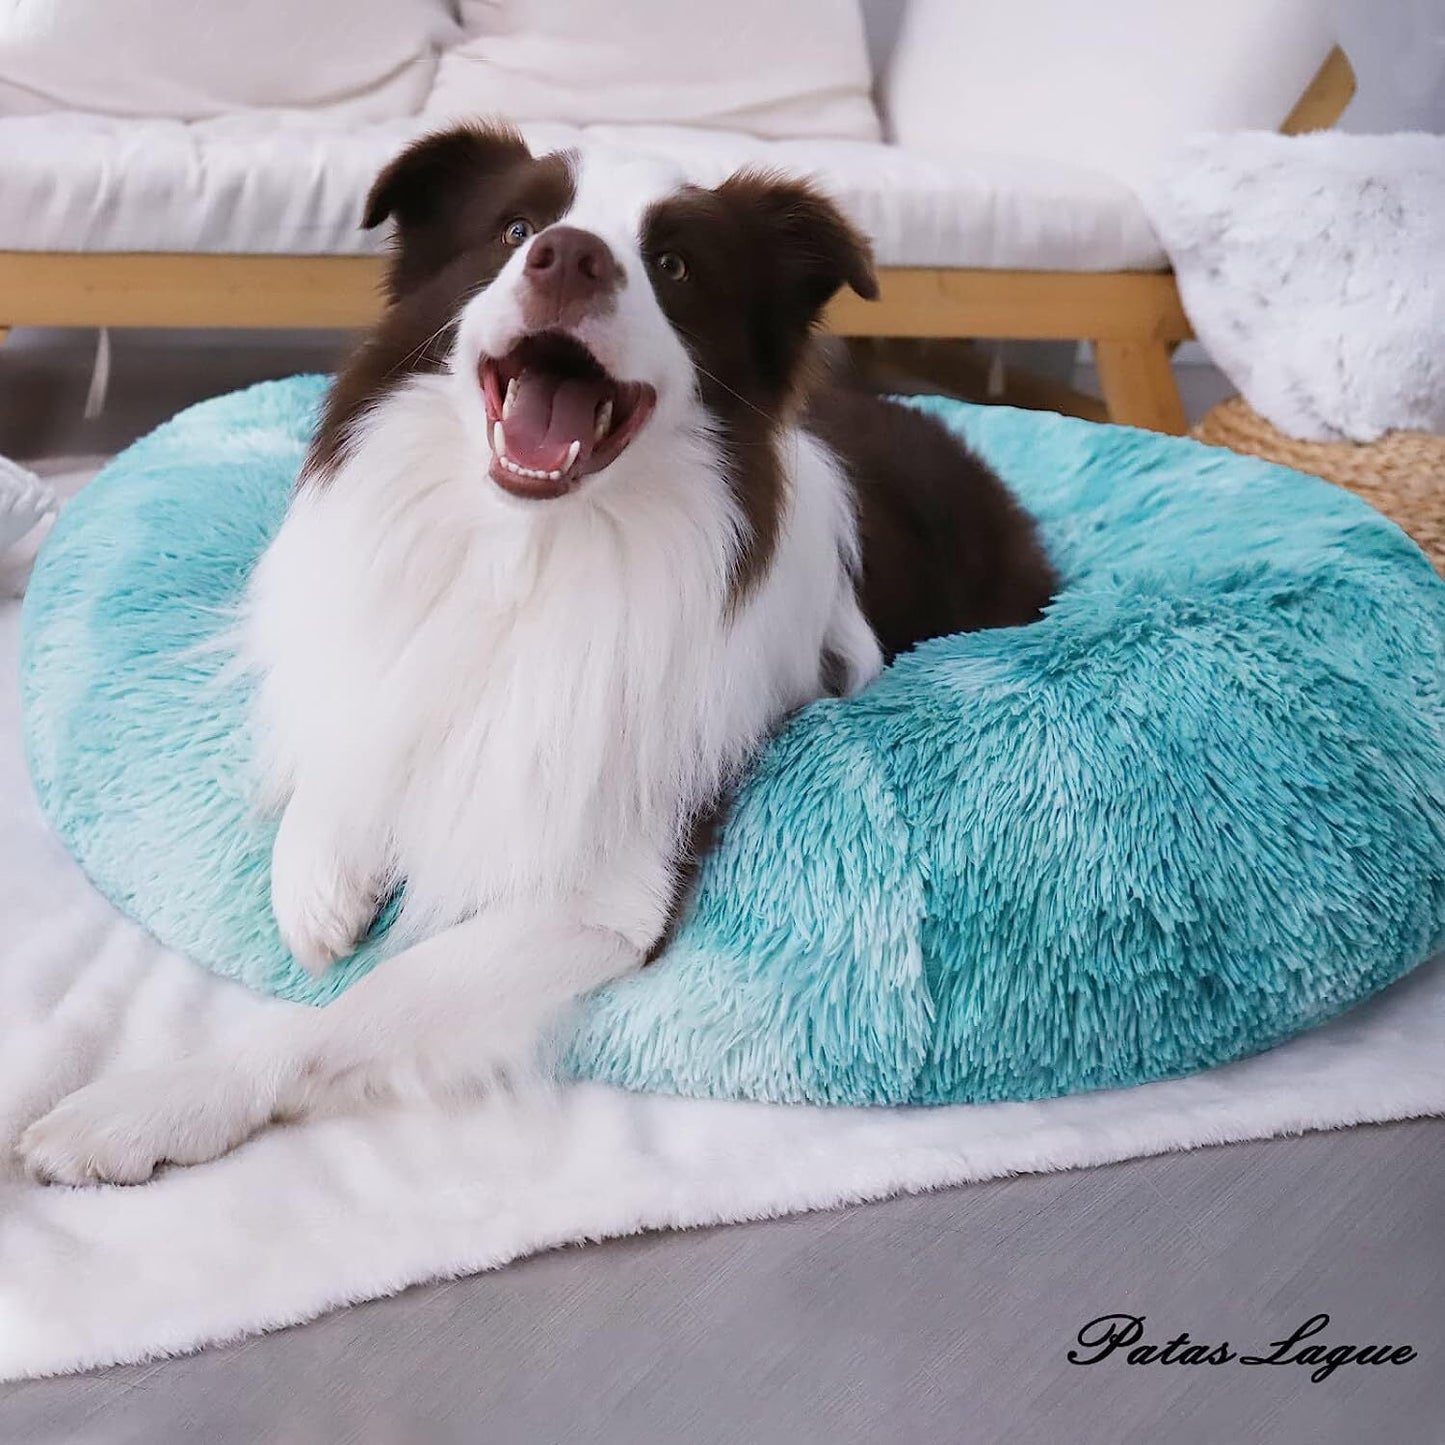 Exclusivo Mezcla Calming Donut Dog Bed Cat Bed for Small Medium Large Dogs and Cats Anti-Anxiety Plush Soft and Cozy Cat Bed Warming Pet Bed for Winter and Fall (20IN, Gradient Aqua)